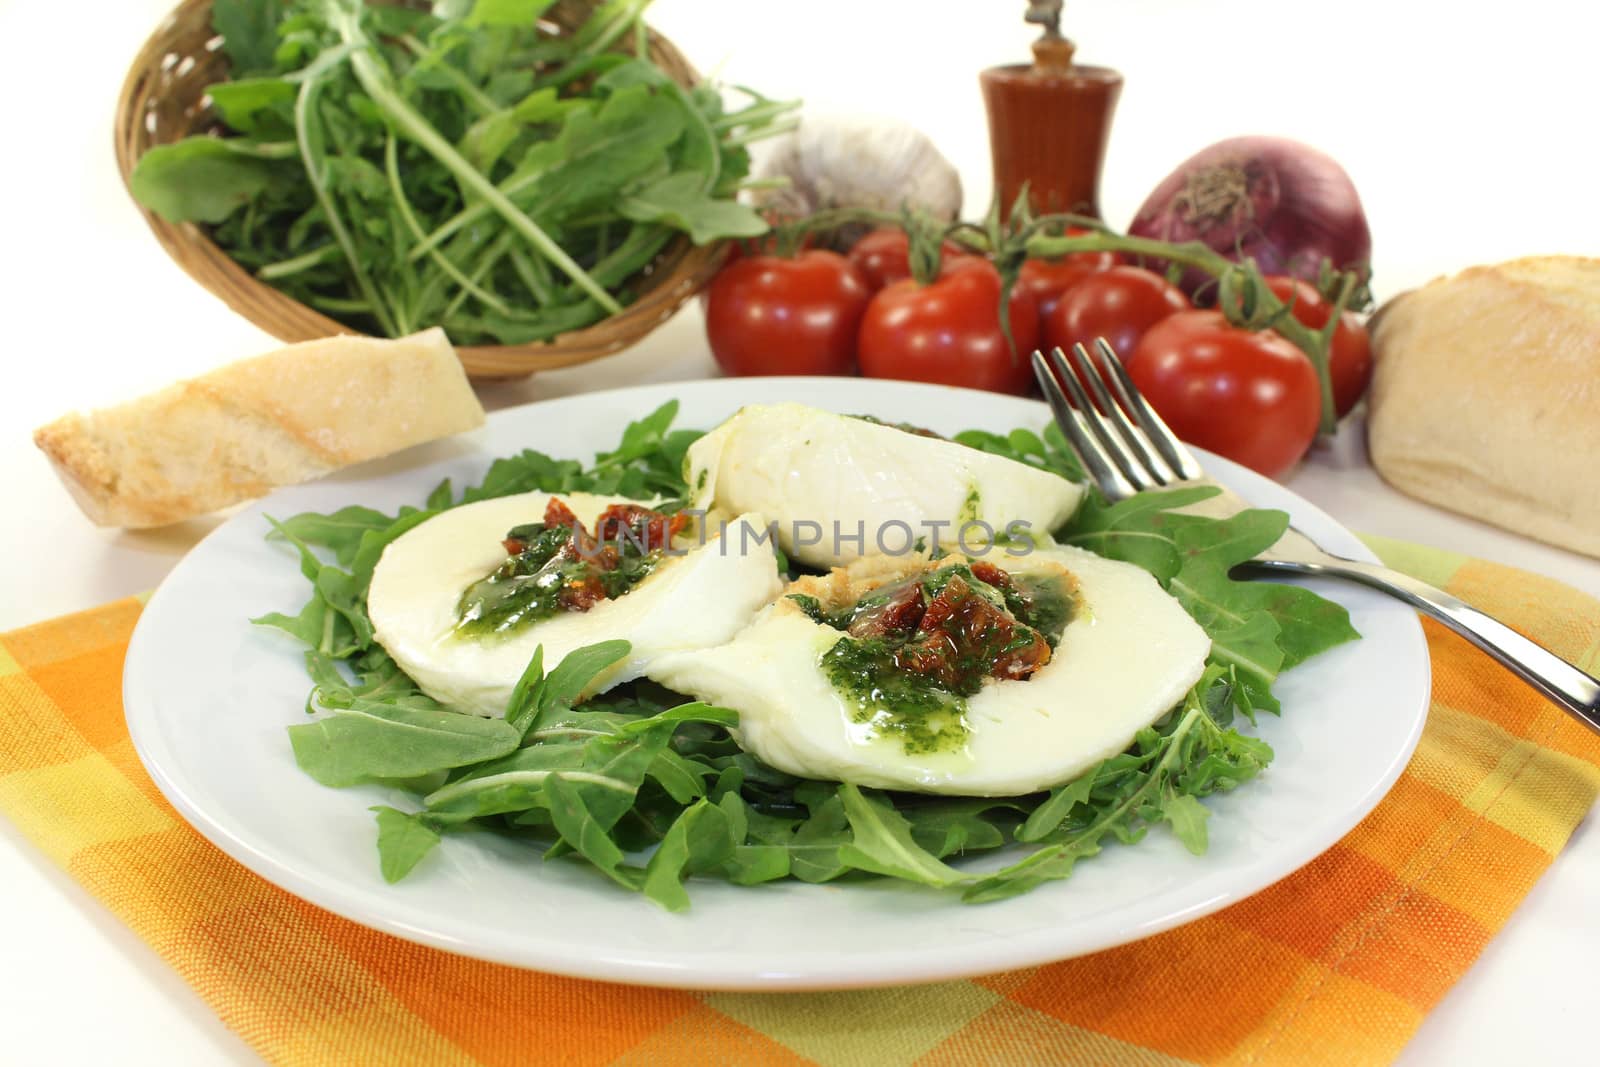 stuffed mozzarella on a rocket in front of white background